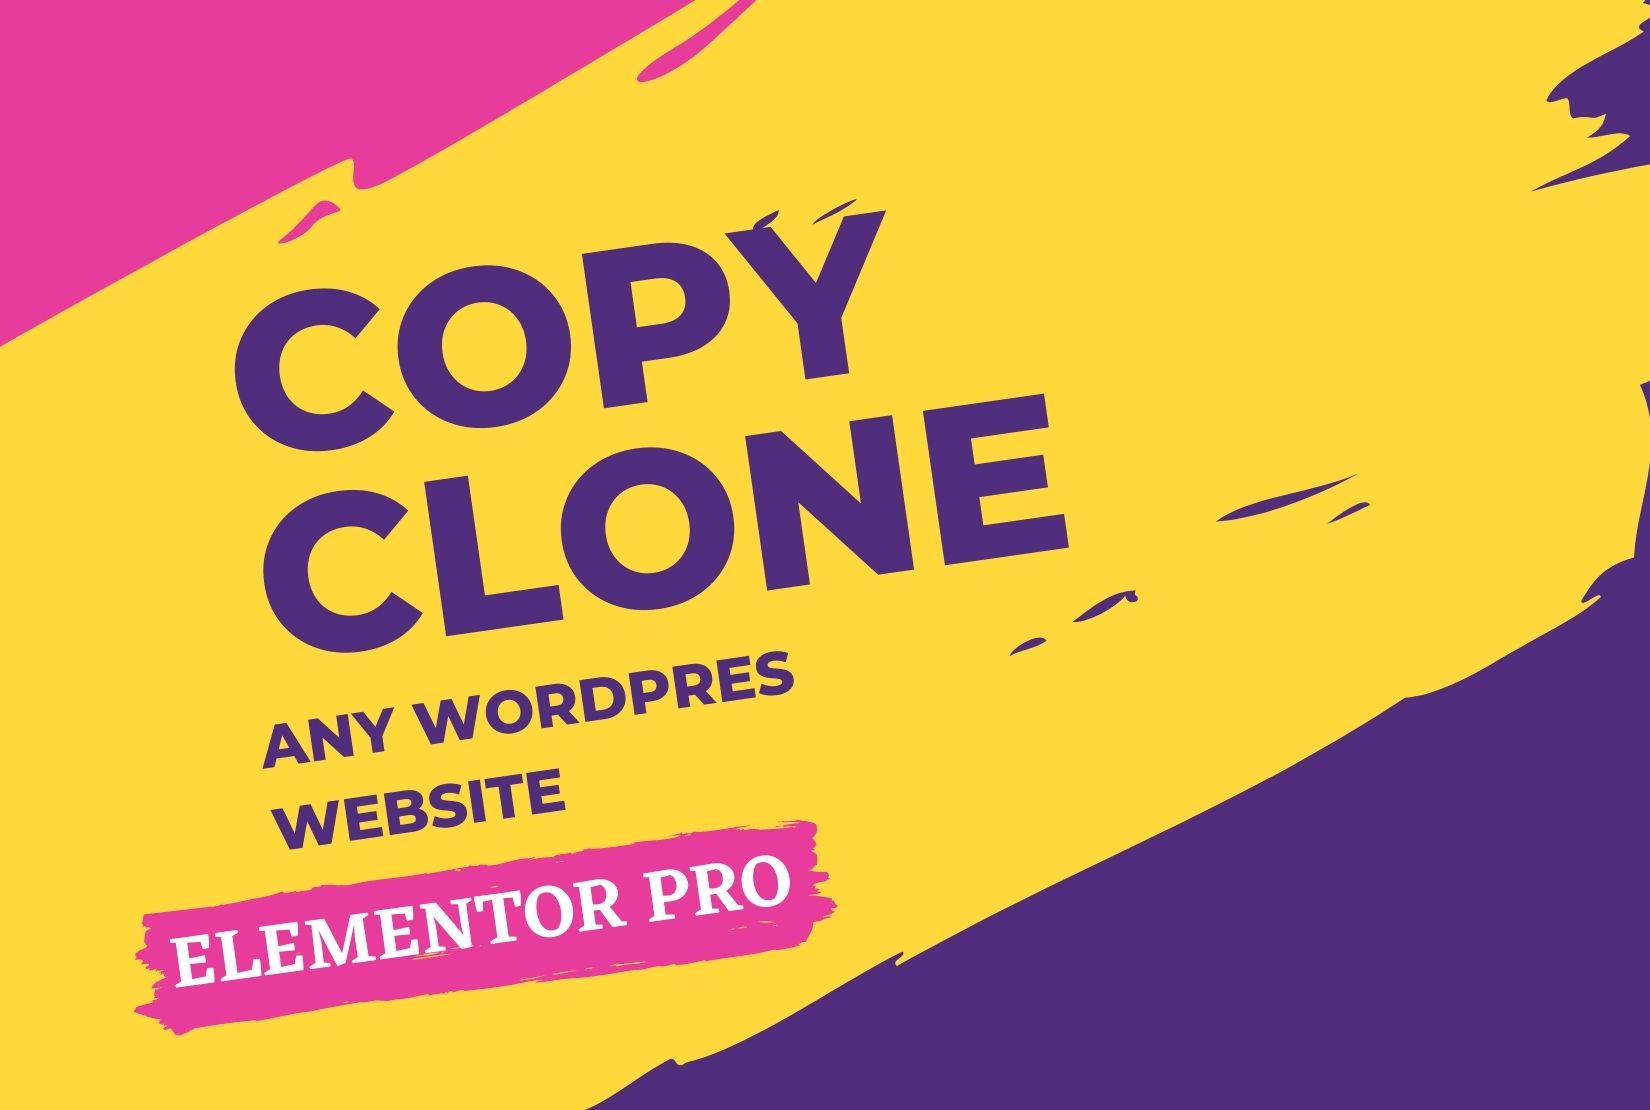 I will do copy clone, duplicate, redesign any web page into elementor template as elementor expert